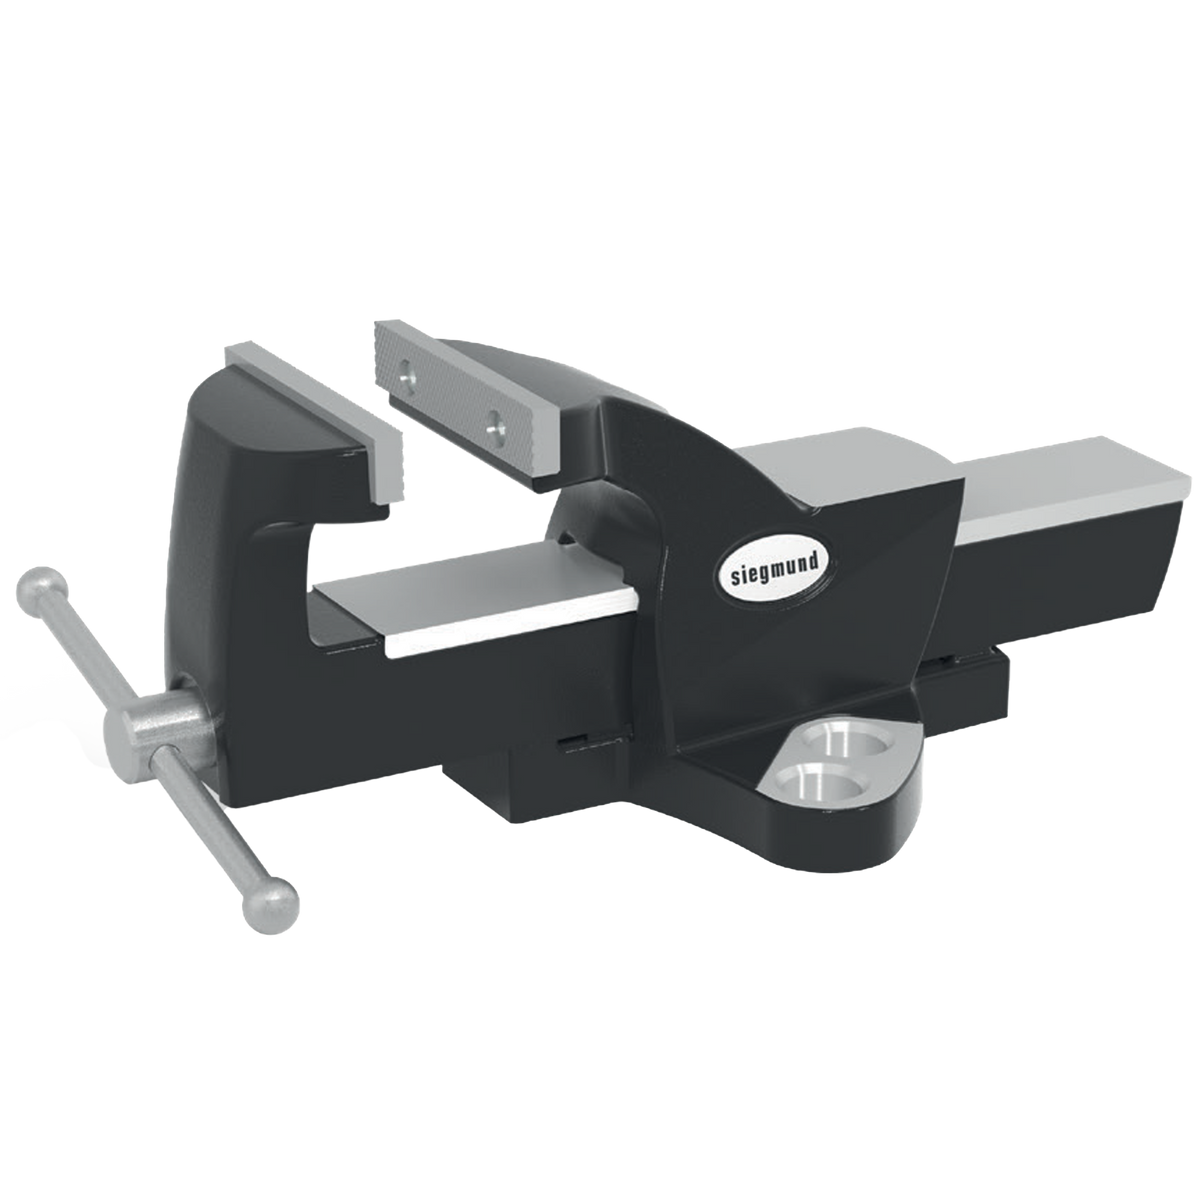 US004320: 4-15/16" Bench Vise with 1-1/10" Boreholes for the System 28 Imperial Series Welding Tables